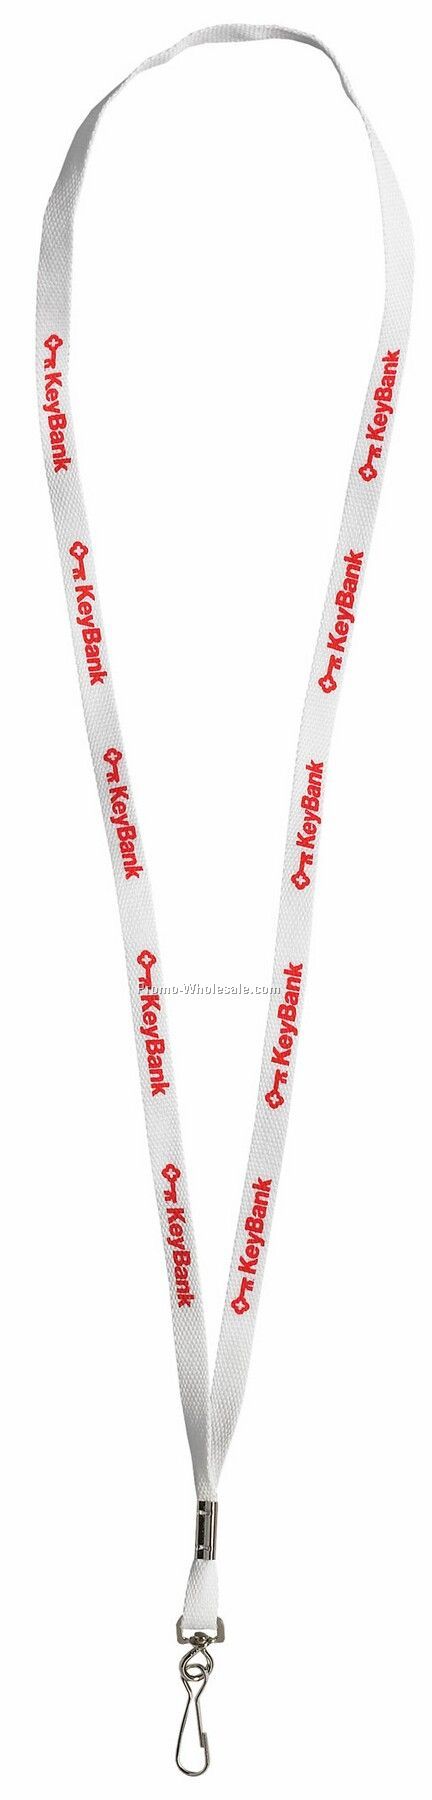 3/8"x34" Fields Recycled Lanyards (Screen Print) - Next Day